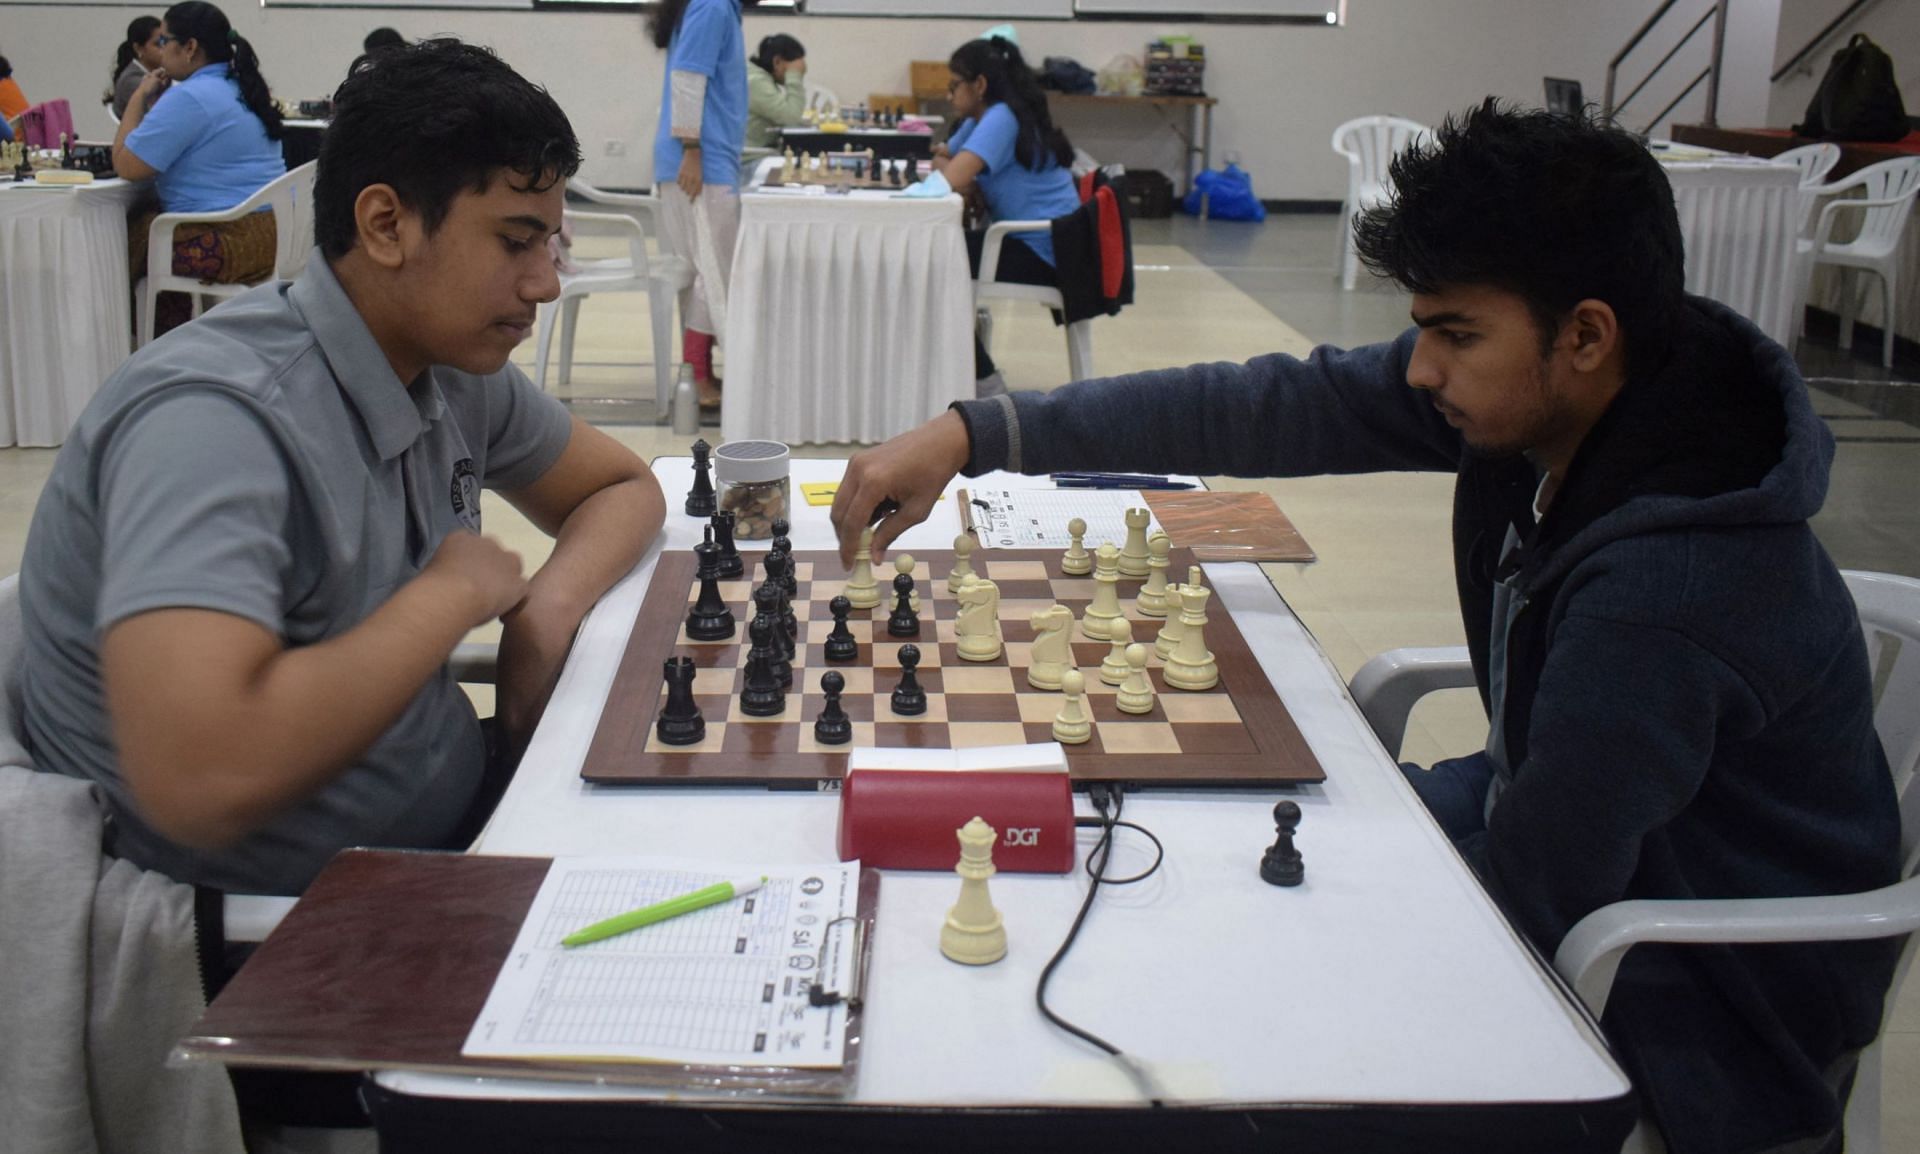 Srihari L of Puducherry (R) making a move against FM Ayush Sharma of Madhya Pradesh during the 10th round match in Pune on Tuesday. (Pic credit: AICF)